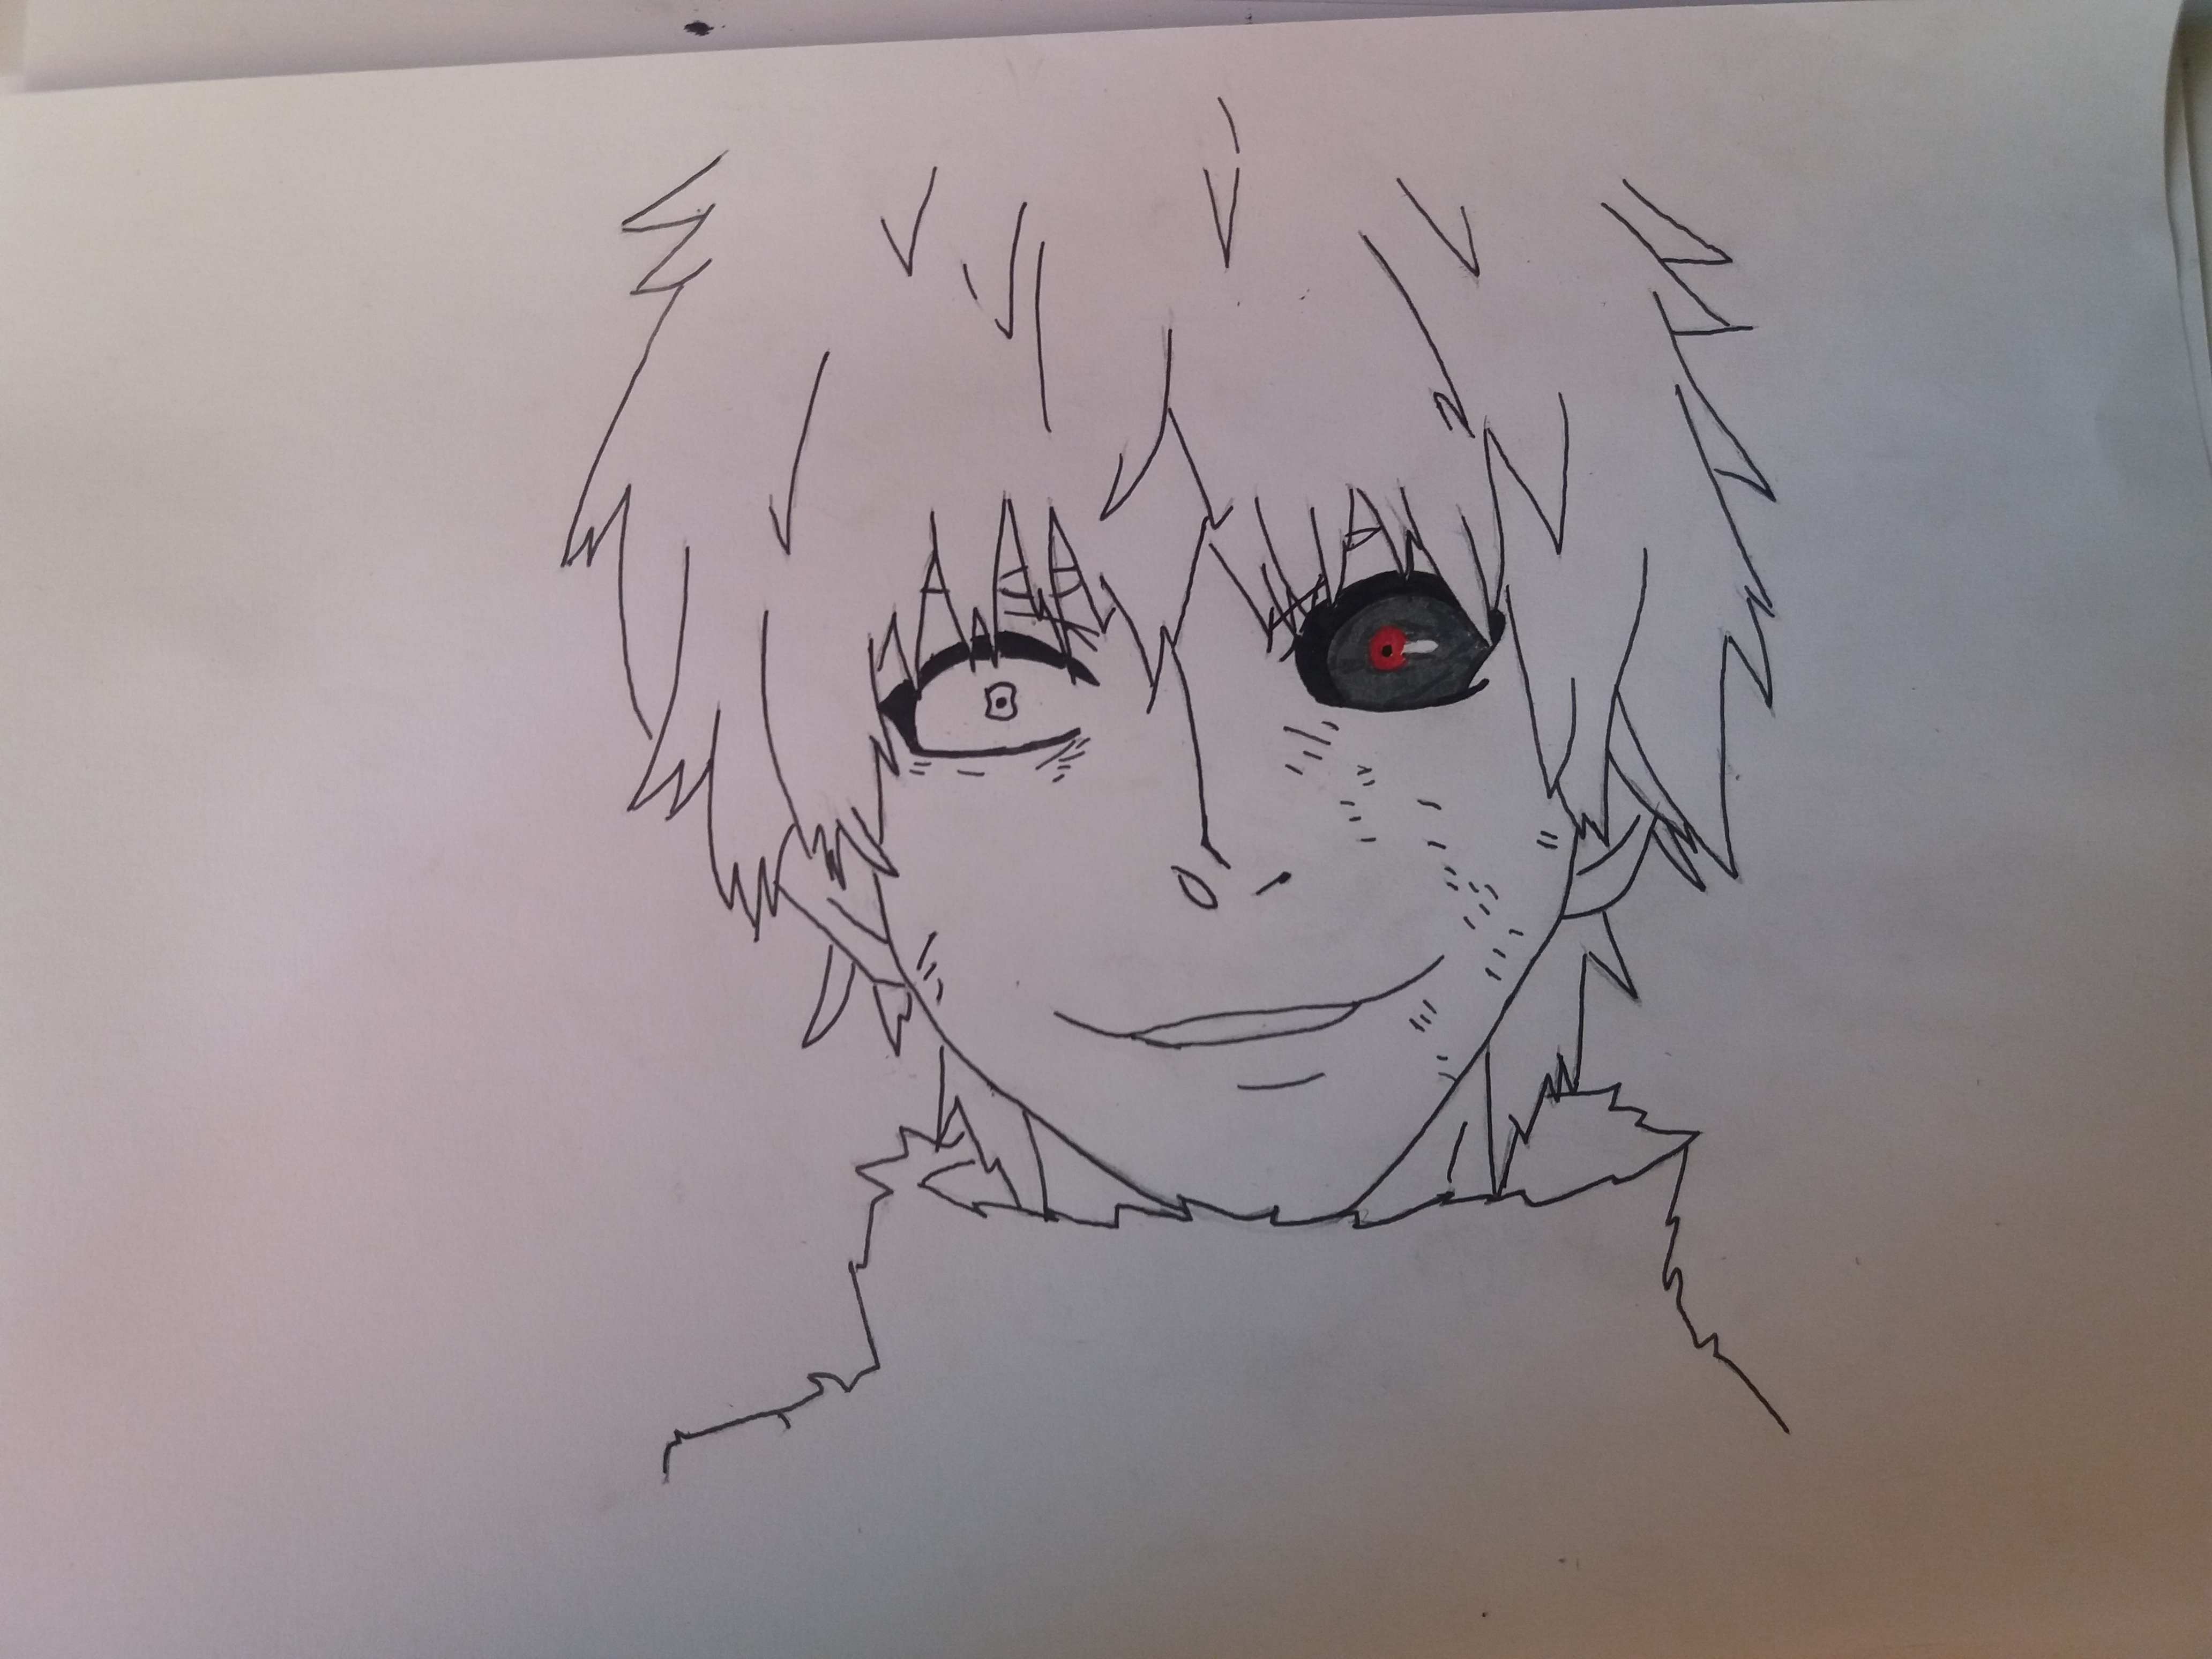 How to Draw Ken Kaneki from Tokyo Ghoul - DrawingNow